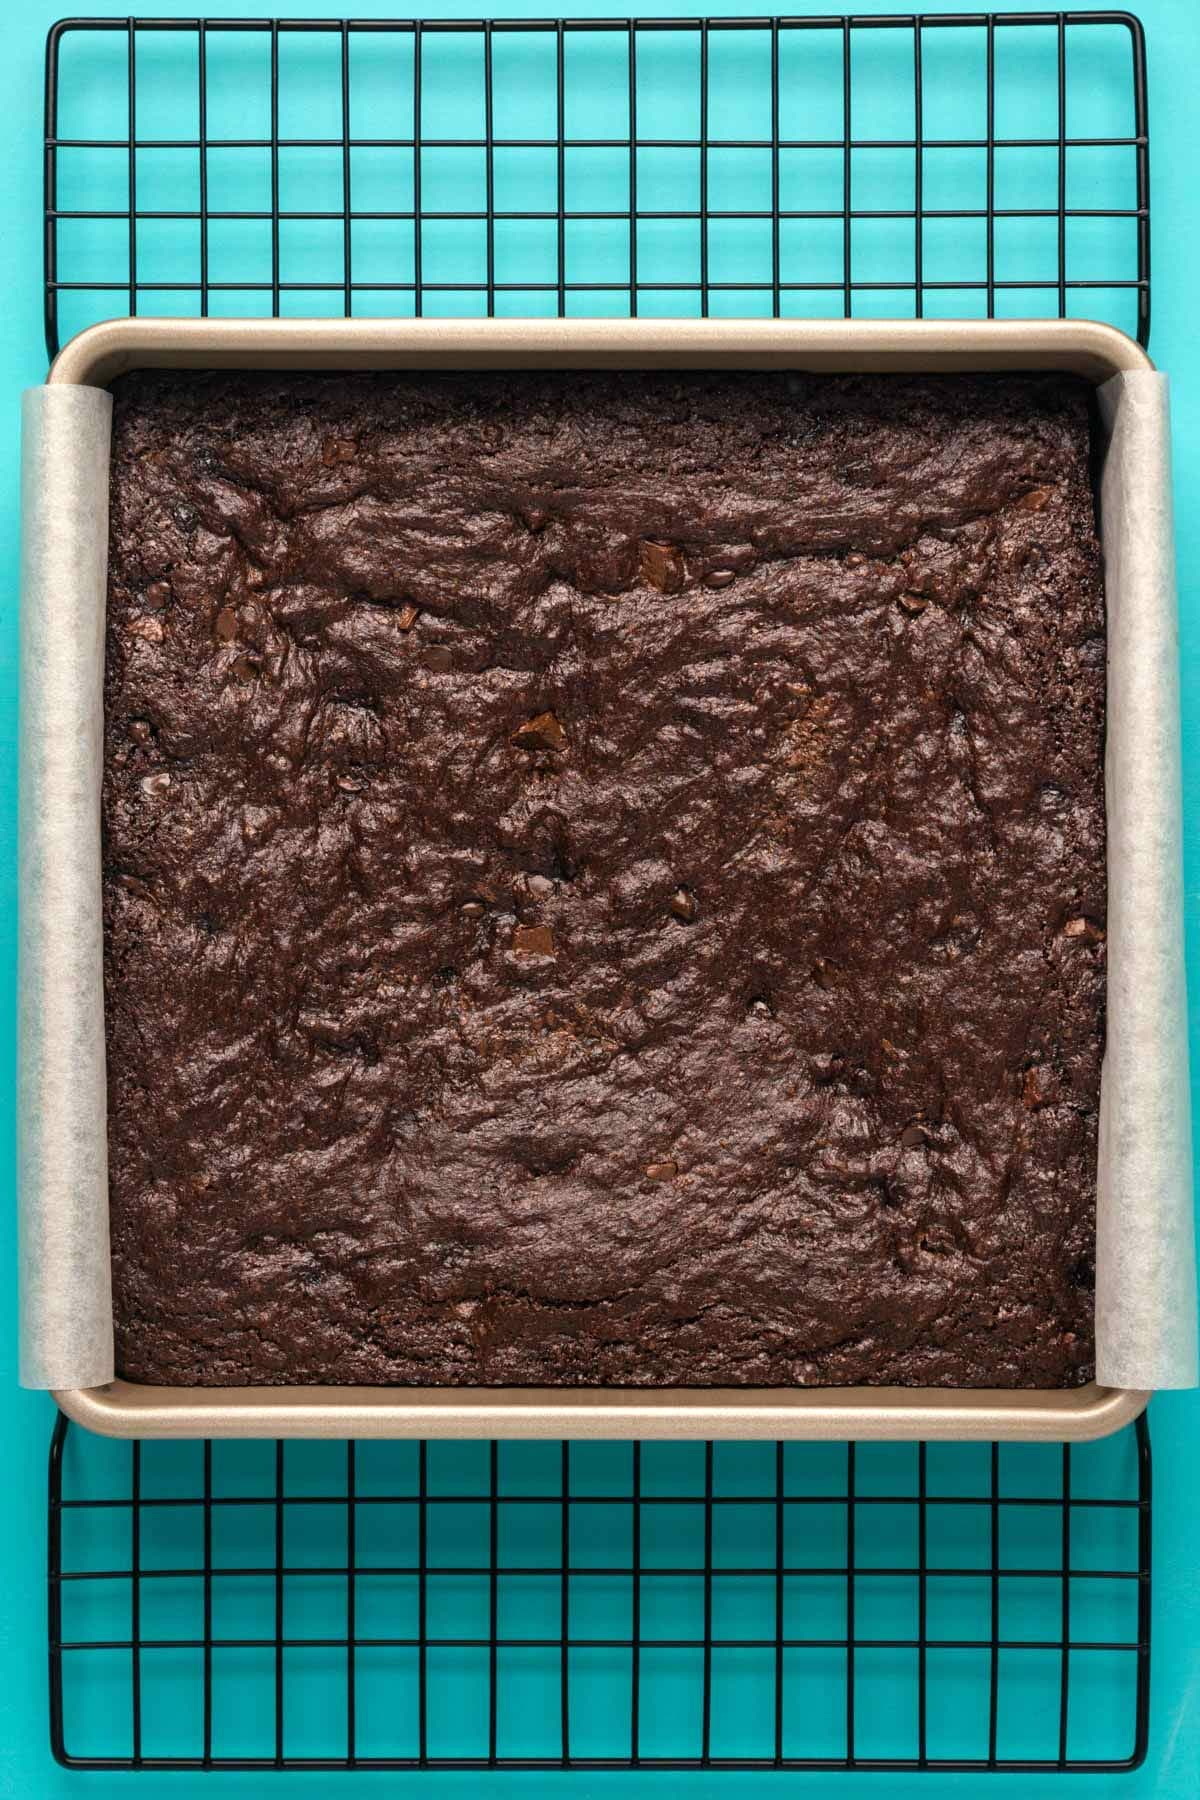 Freshly baked brownies in a square baking dish.